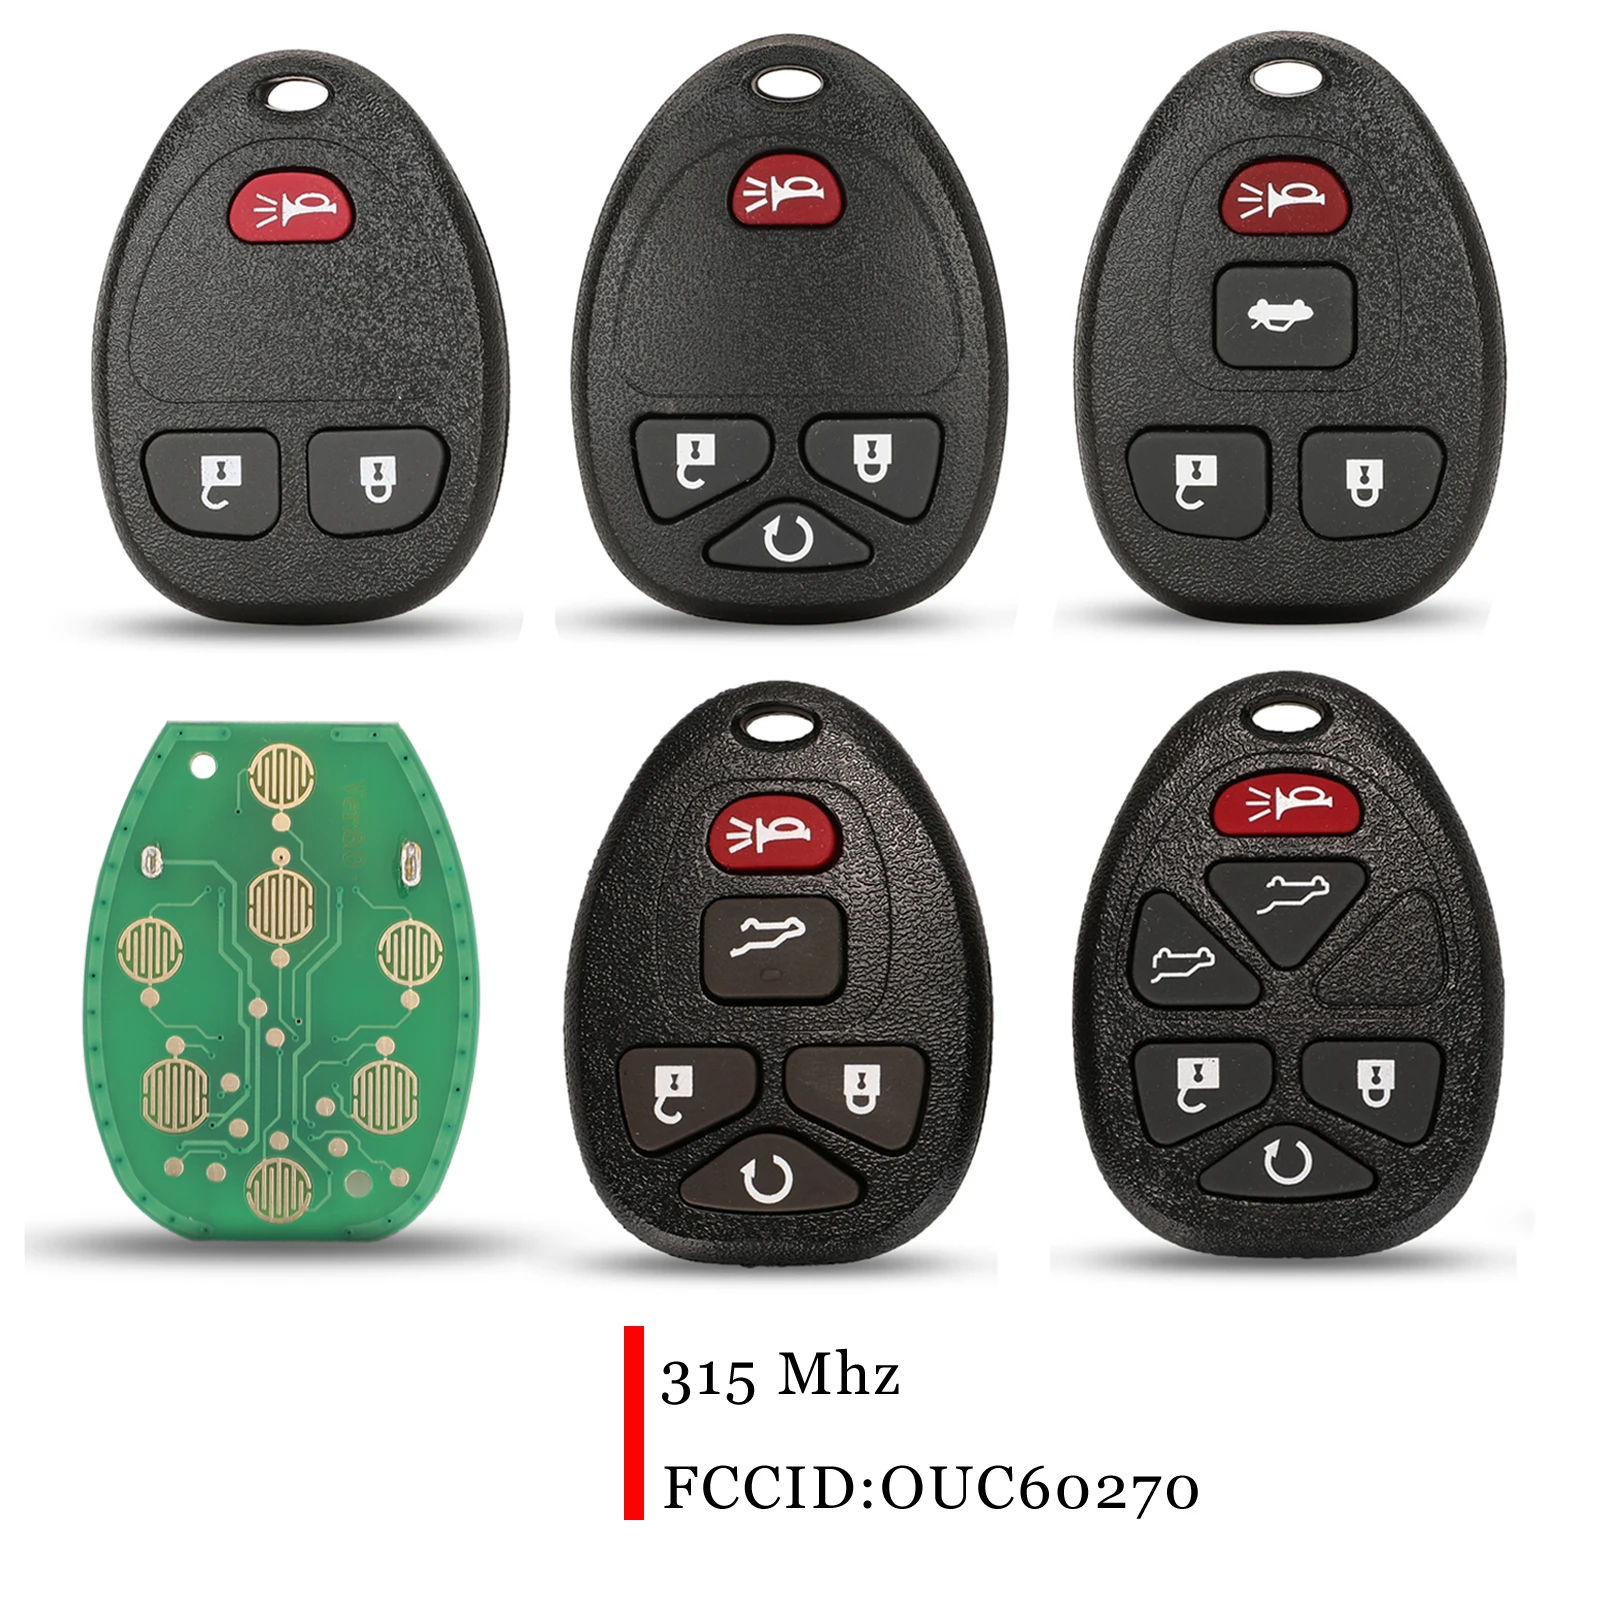 

jingyuqin 3/4/5/6 Buttons Remote Control Keyless Entry Car Key Fob For Buick Chevrolet Cadillac GMC Saturn 315Mhz OUC60270